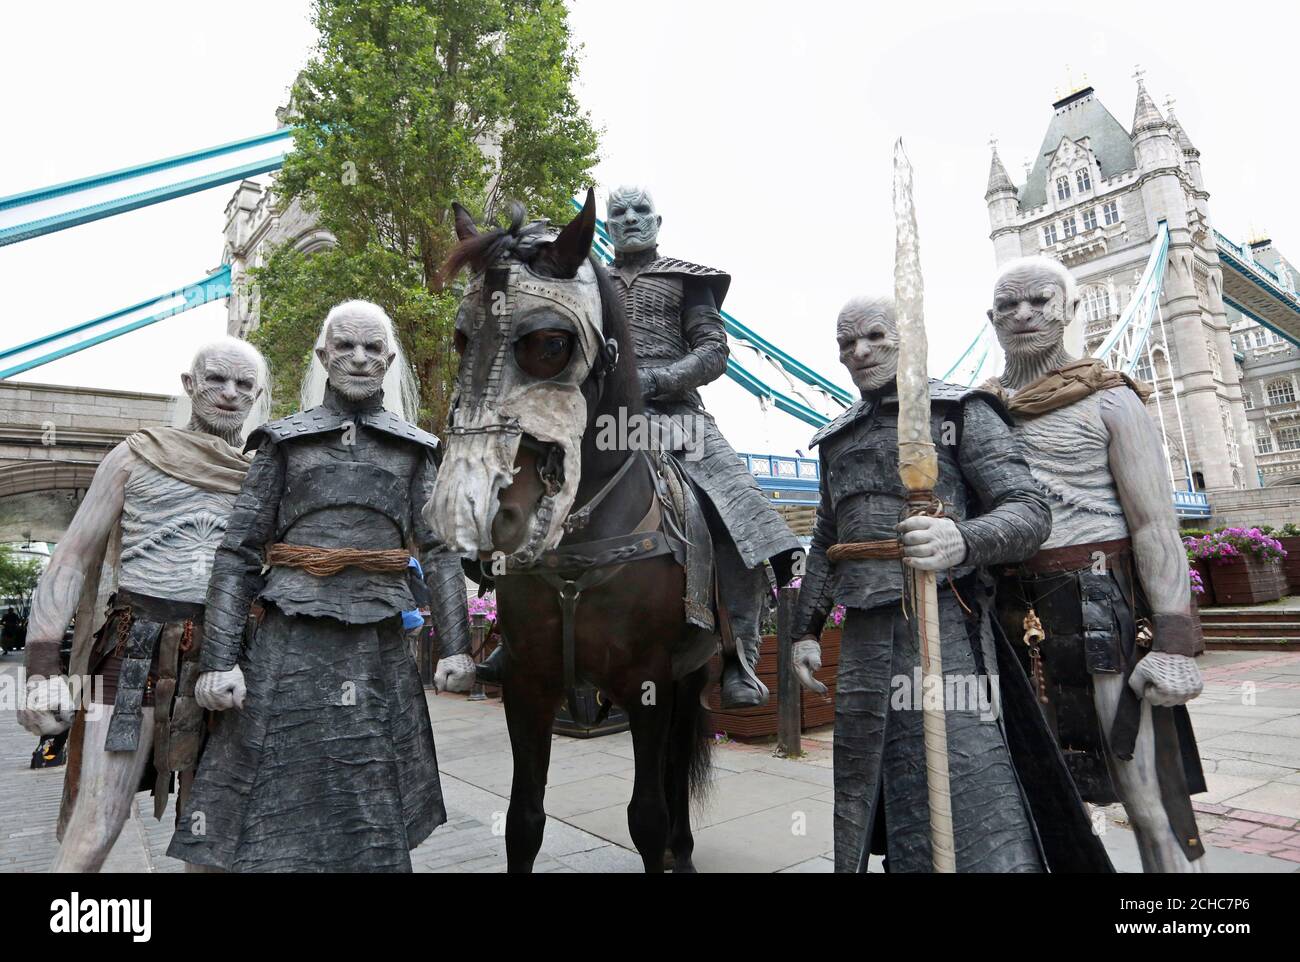 Five models dressed as White Walkers from Game of Thrones, led by the Night King on horseback, pass by Tower Bridge in London to celebrate the upcoming start of season 7 of the television show, which airs at 9pm on Monday July 17th on Sky Atlantic. Stock Photo